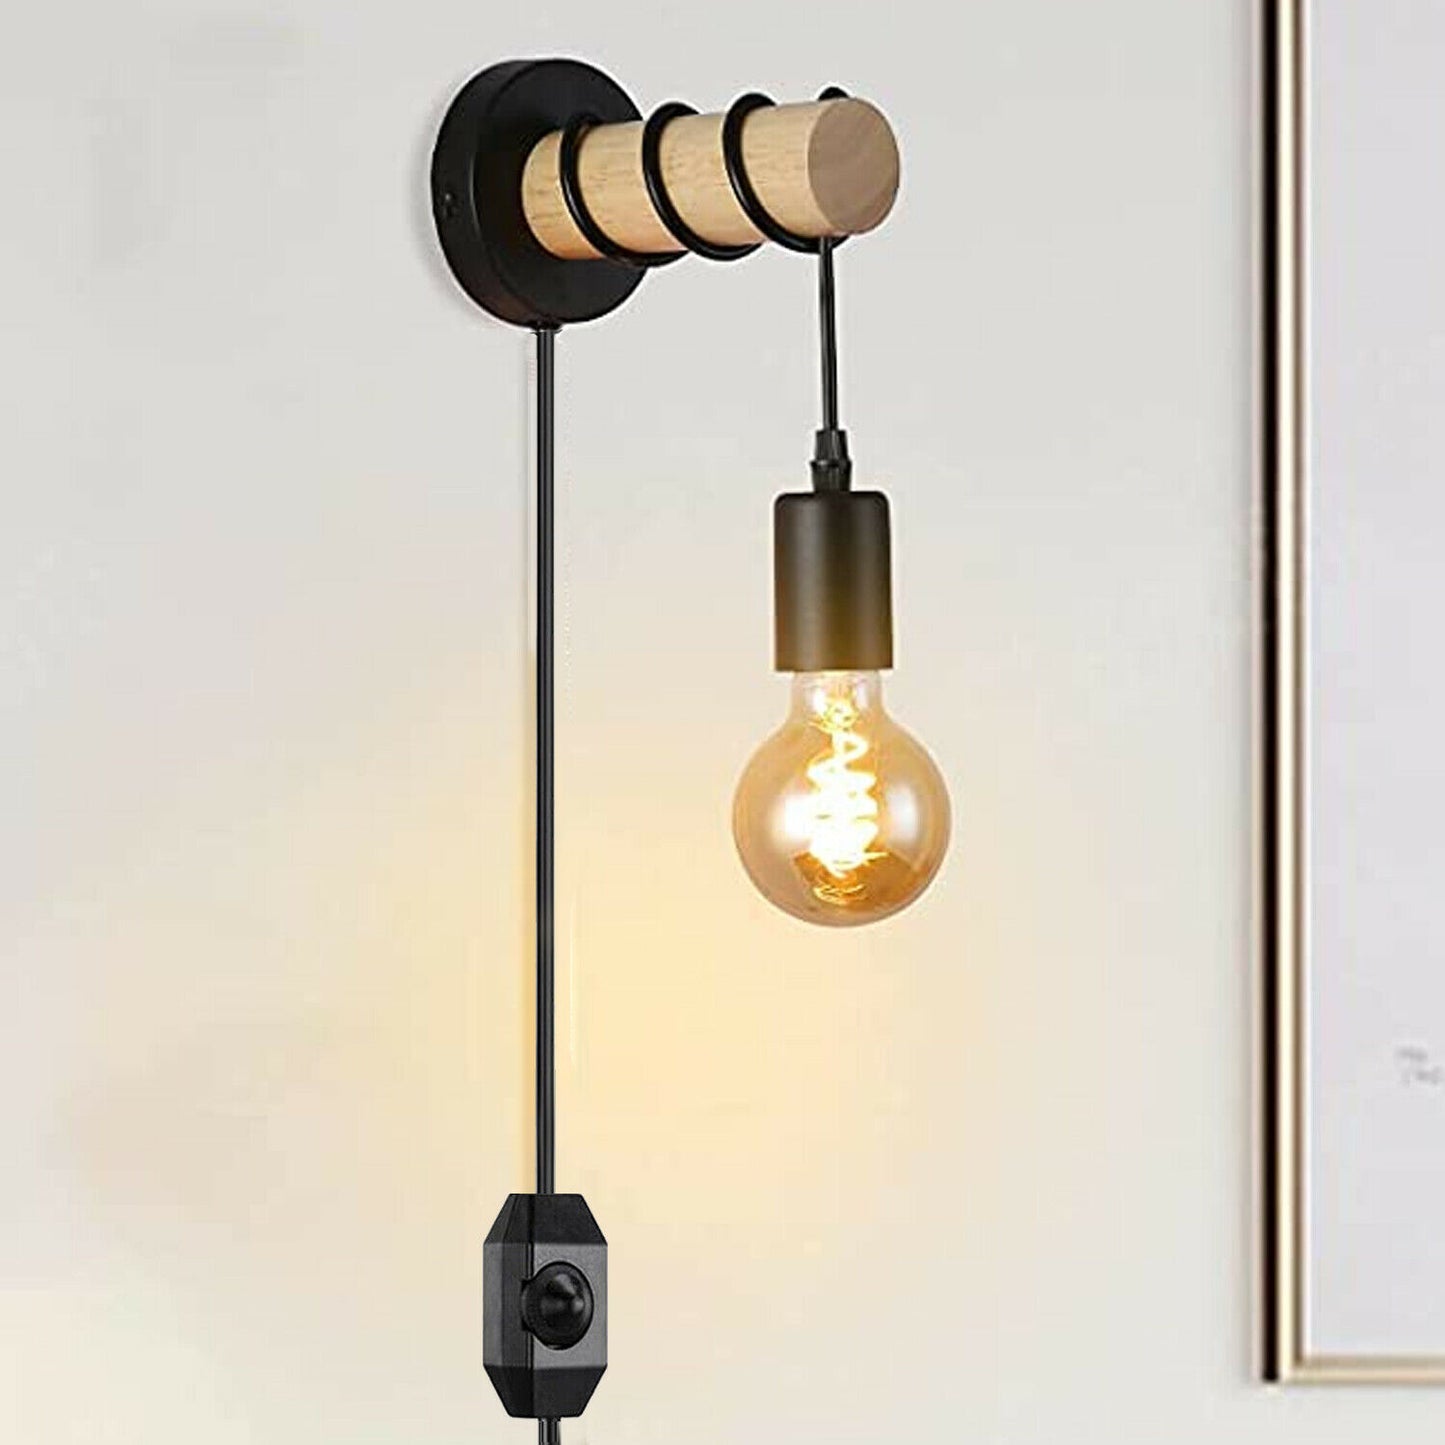 Black Industrial Wall Sconce with Plug-in Cord - Farmhouse Style Metal Fitting for Stylish-Application image